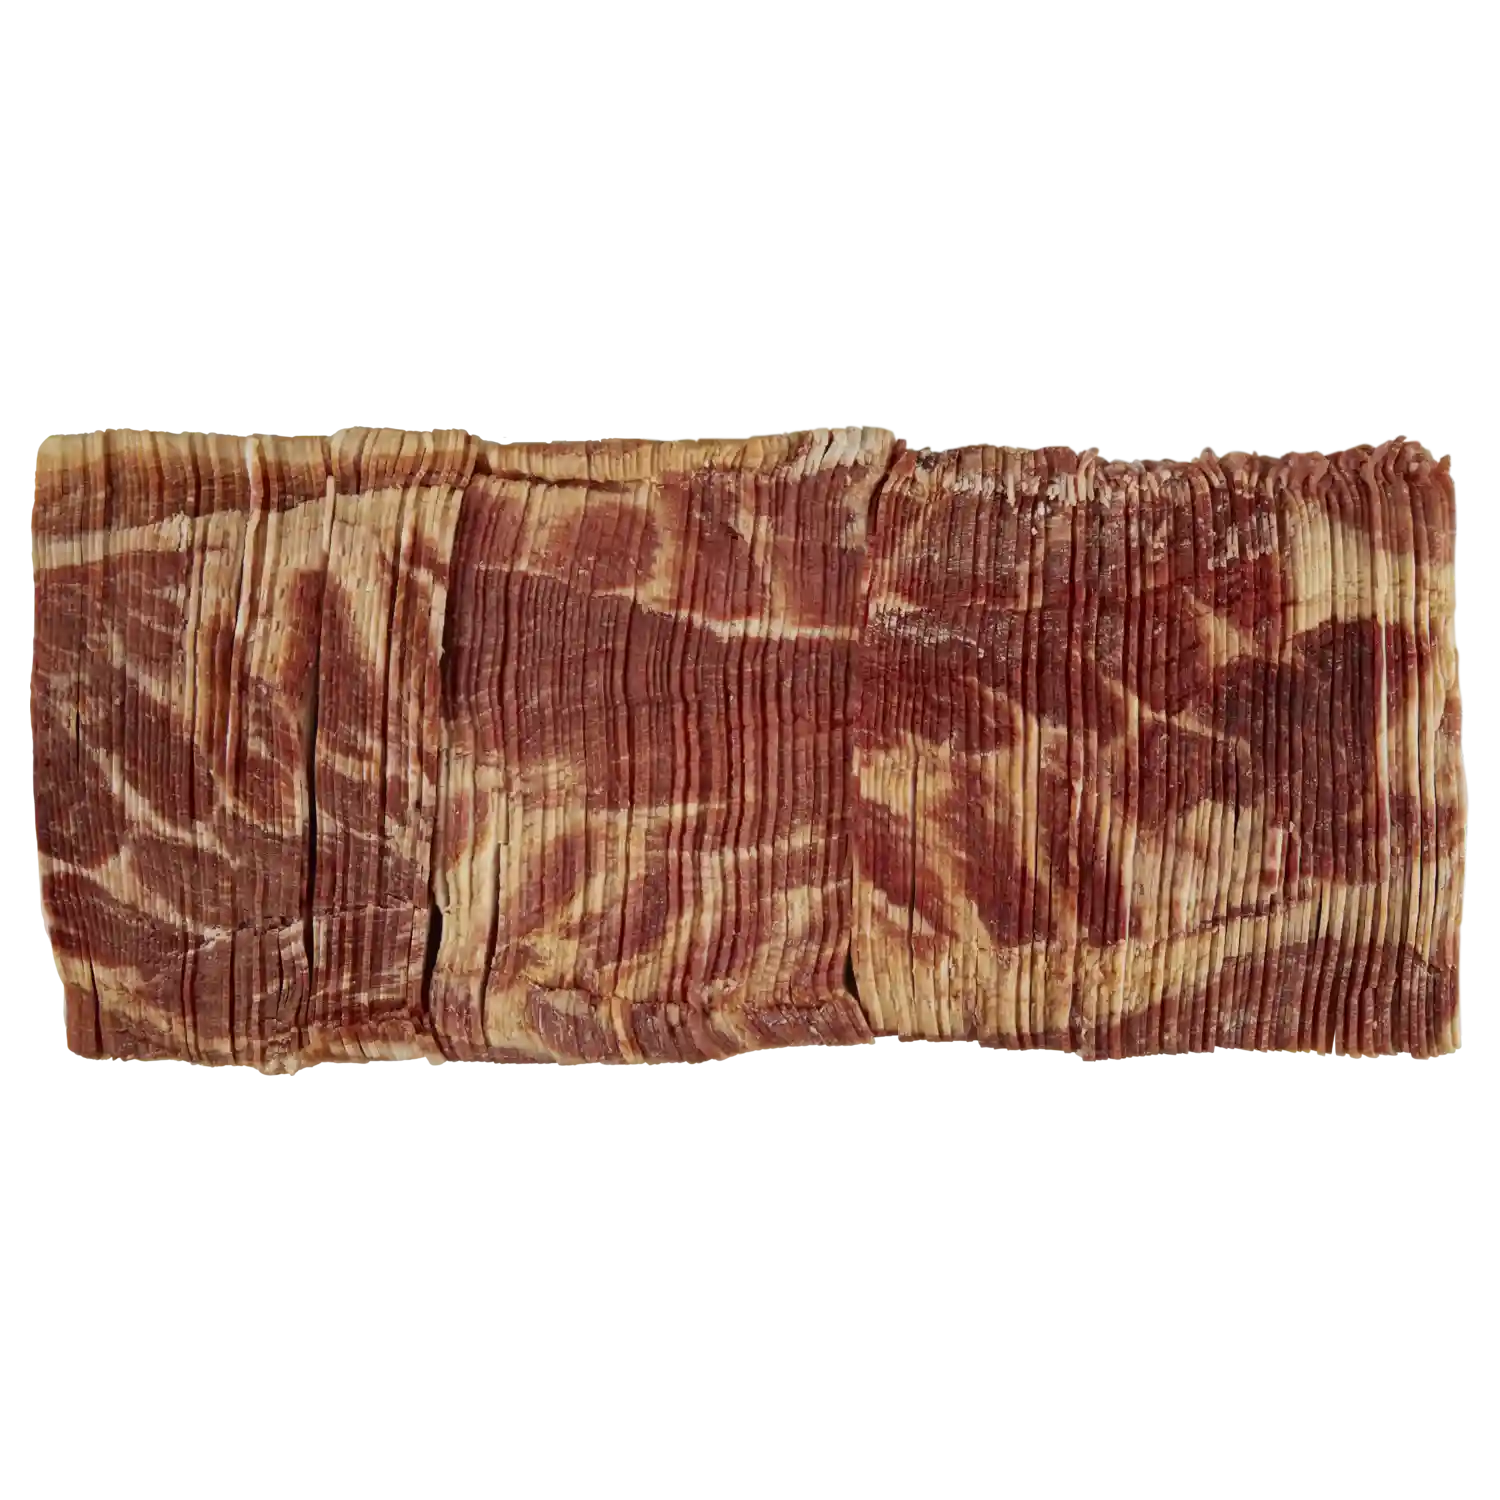 Wright® Brand Naturally Hickory Smoked Regular Sliced Bacon, Bulk, 30 Lbs, 14-18 Slices per Pound, Frozen_image_31